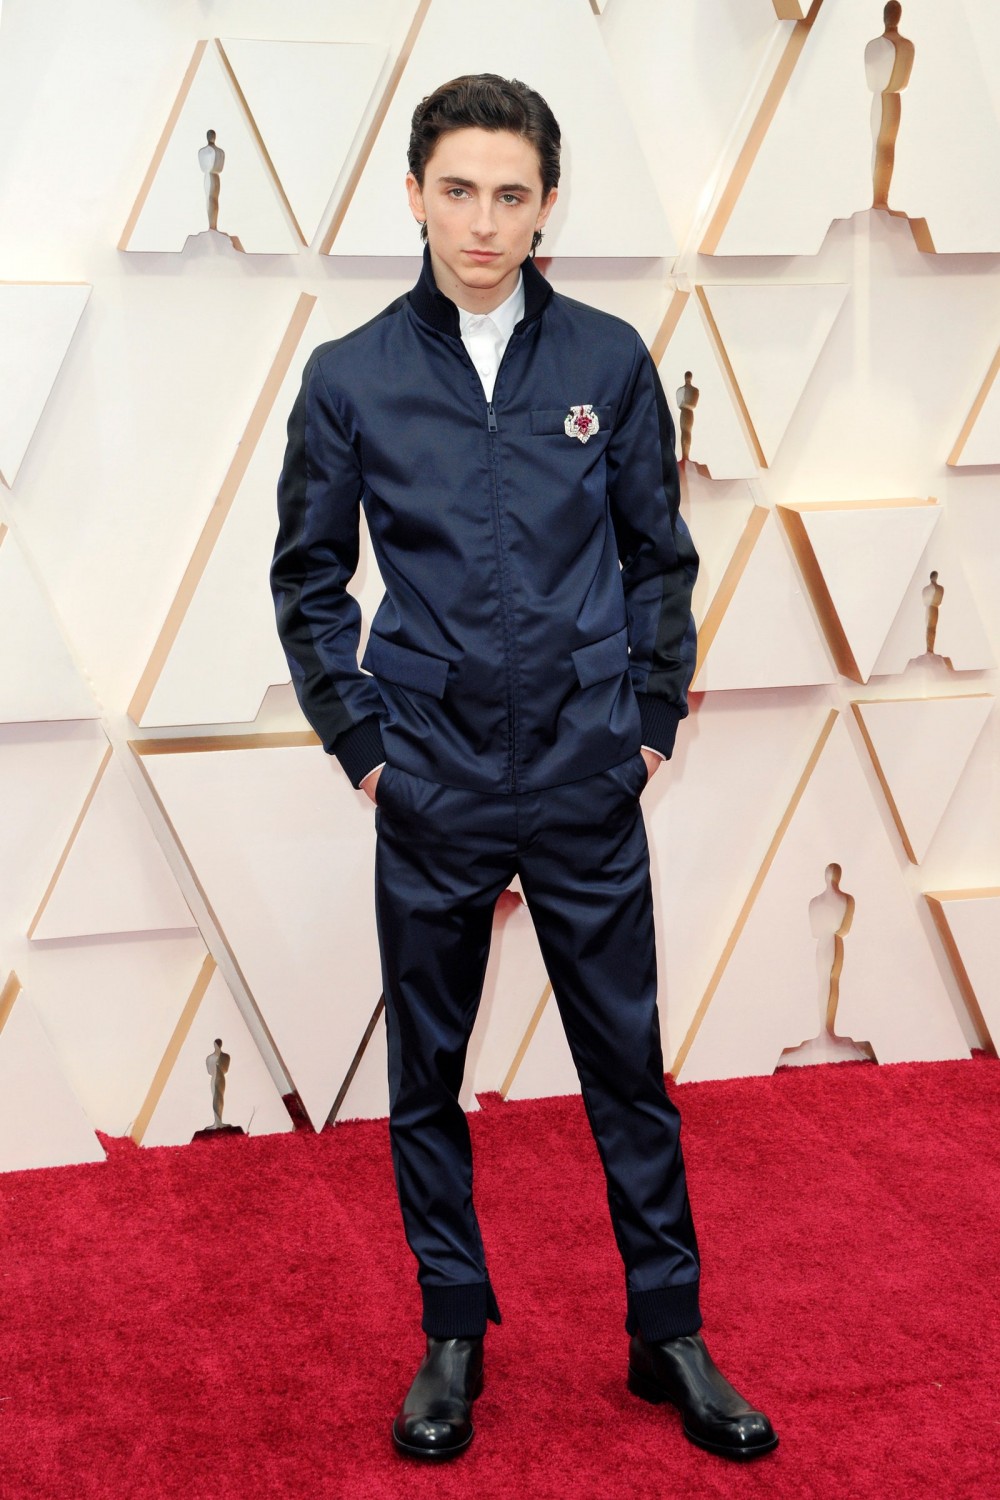 Timothe Chalamet in Prada at the 2020 Academy Awards